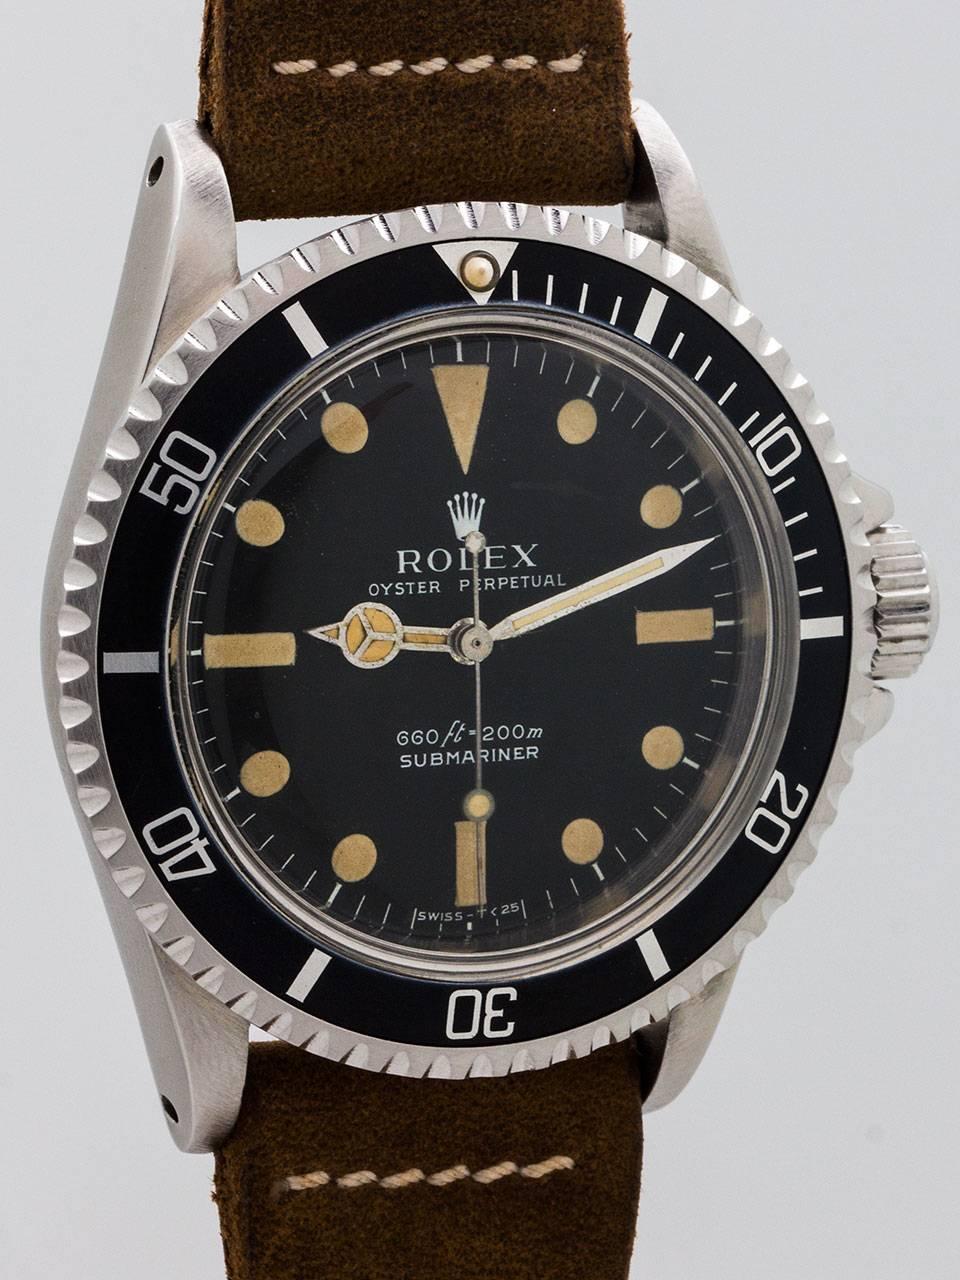 Vintage Rolex Submariner ref 5513 serial number 3.7 million circa 1974. Featuring 40mm diameter stainless steel case with bidirectional elapsed time bezel, faded elapsed time insert with patina’d pearl, and dome acrylic crystal. With very pleasing